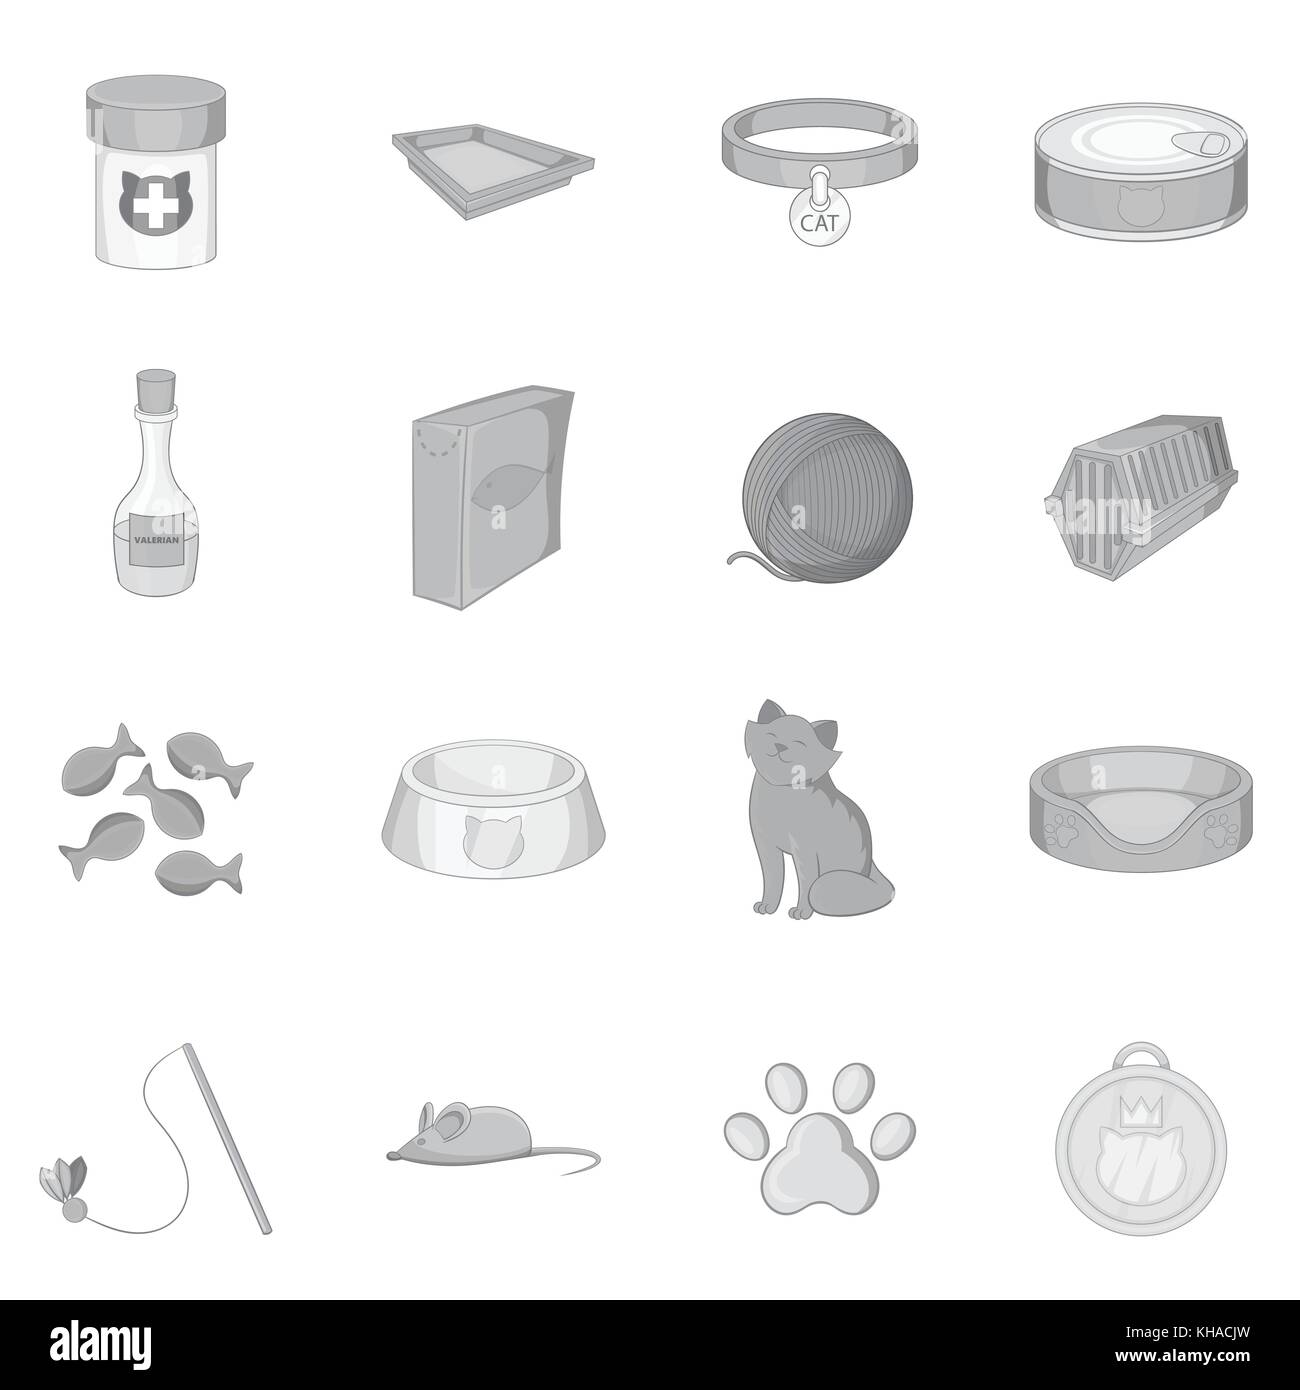 Cats accessories icons set, monochrome style Stock Vector